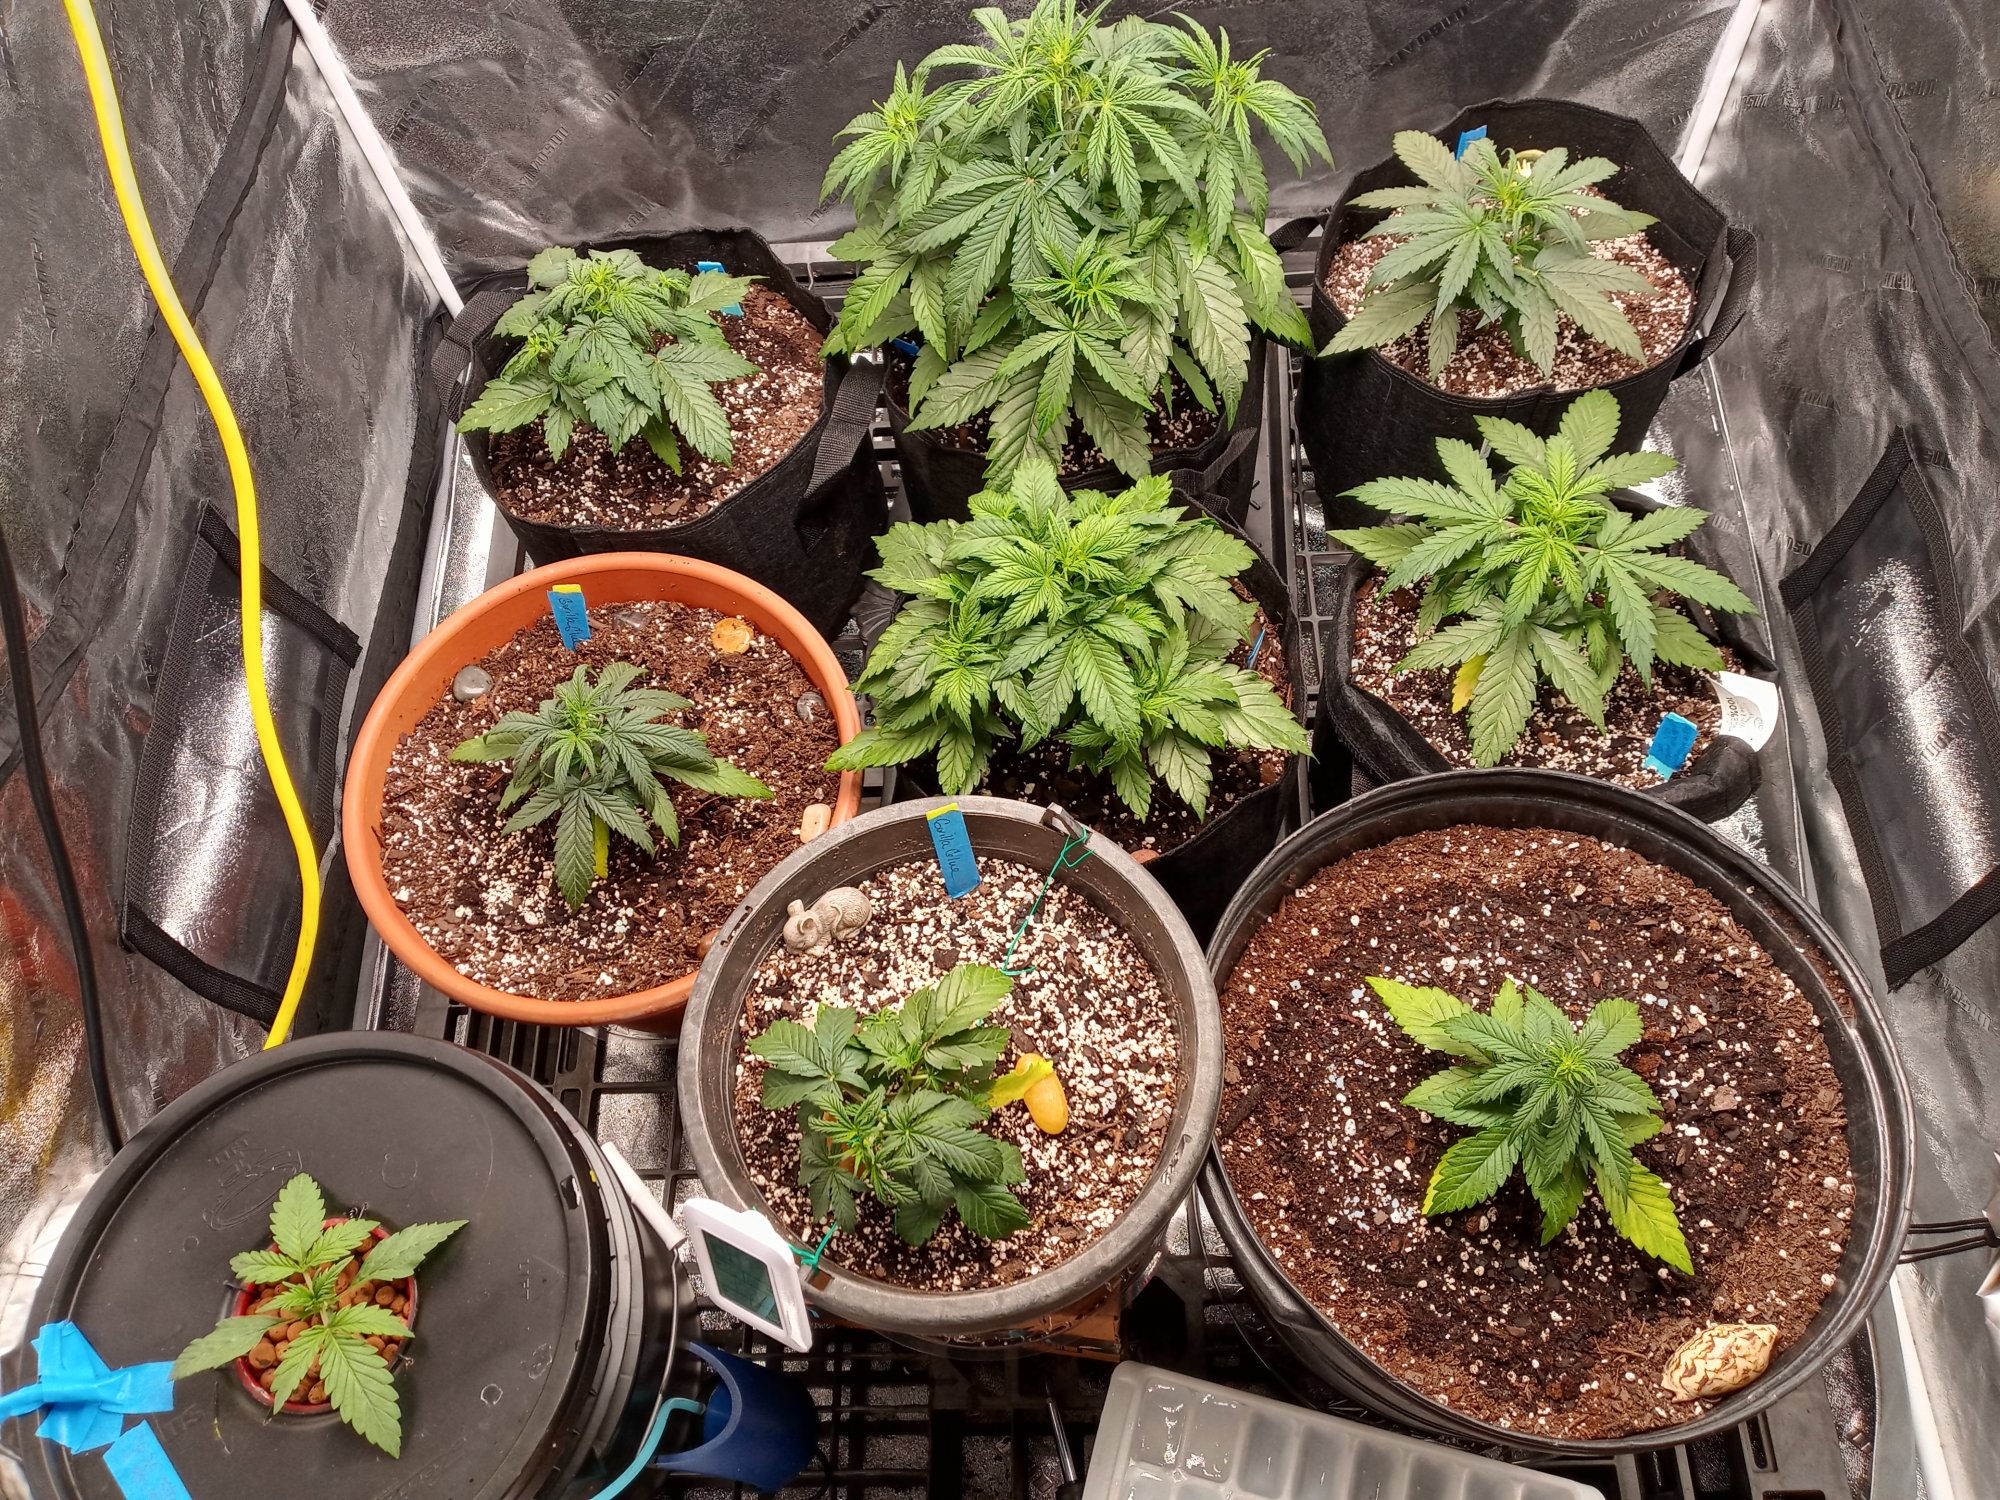 New to autos indoor and dwc trying a lil of each lolhows my grow 14